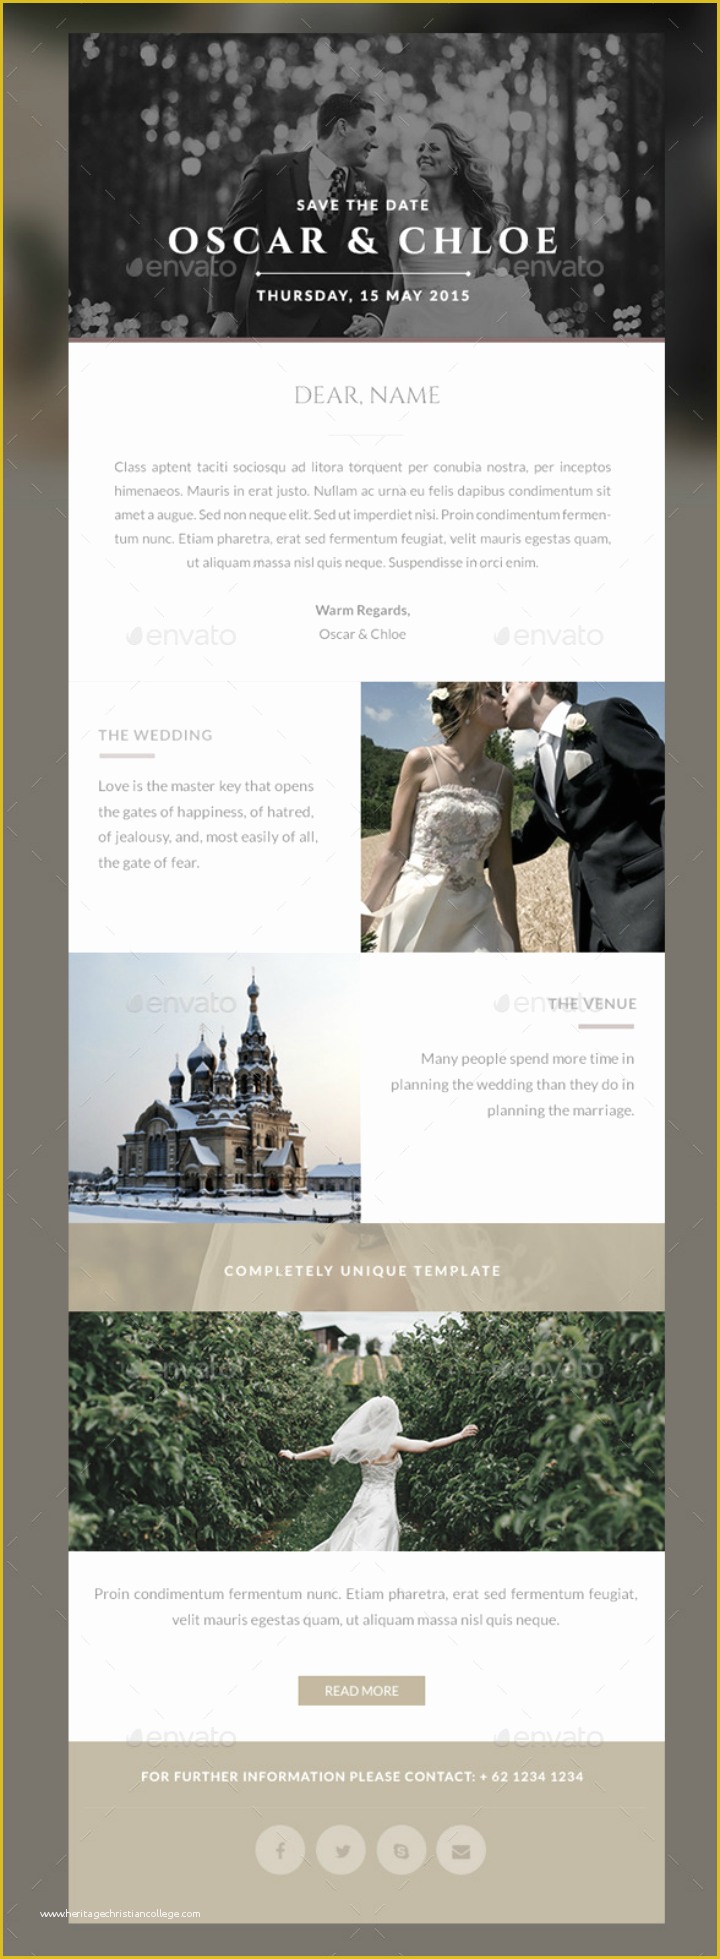 Free Email Wedding Invitation Templates Of 14 Wedding Email Designs & Templates Psd Ai